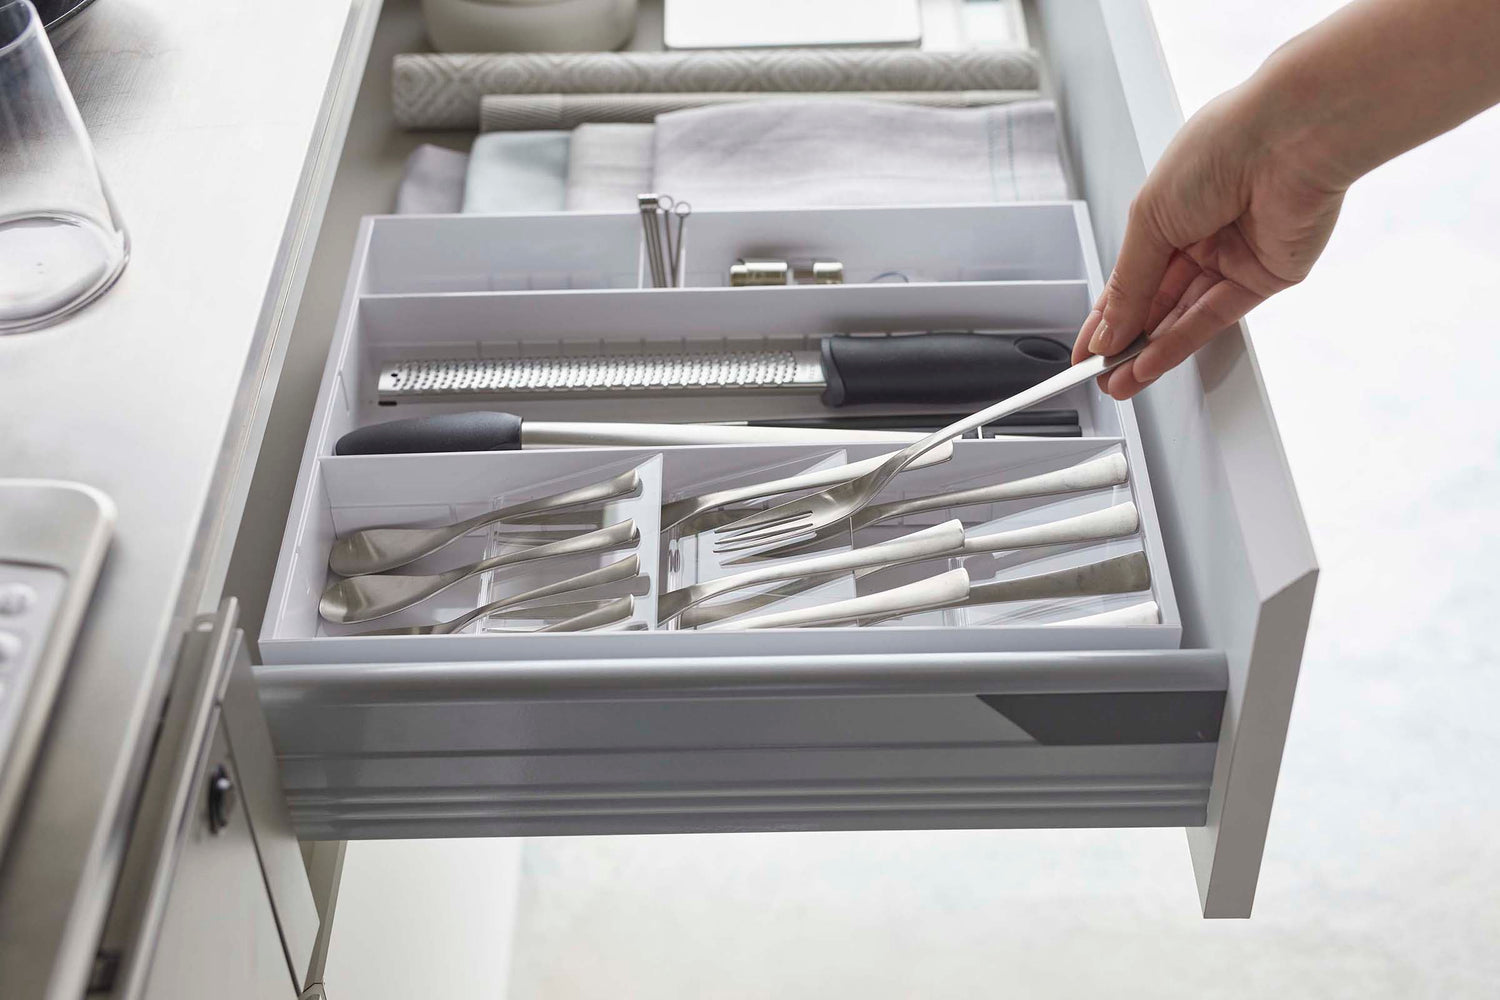 View 17 - Side view of person placing fork in white Expandable Cutlery Storage Organizer by Yamazaki Home.